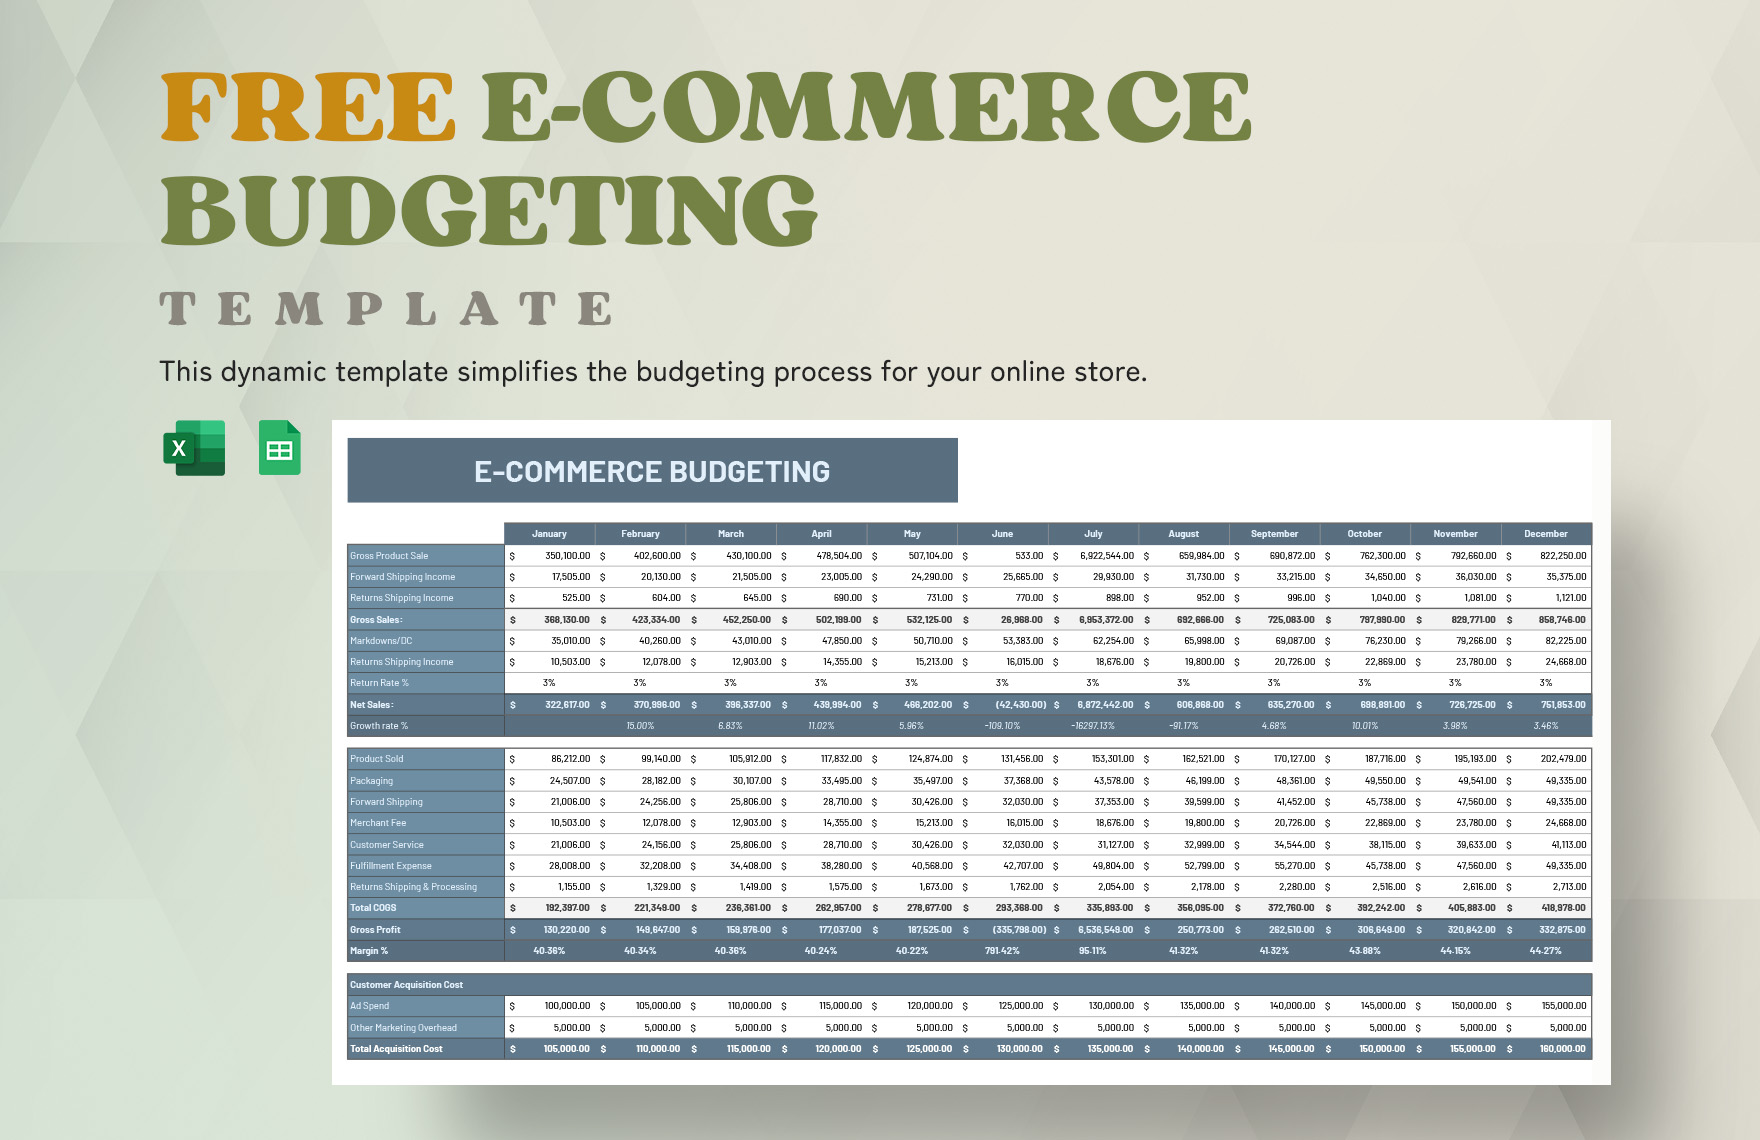 E-commerce Budgeting Template